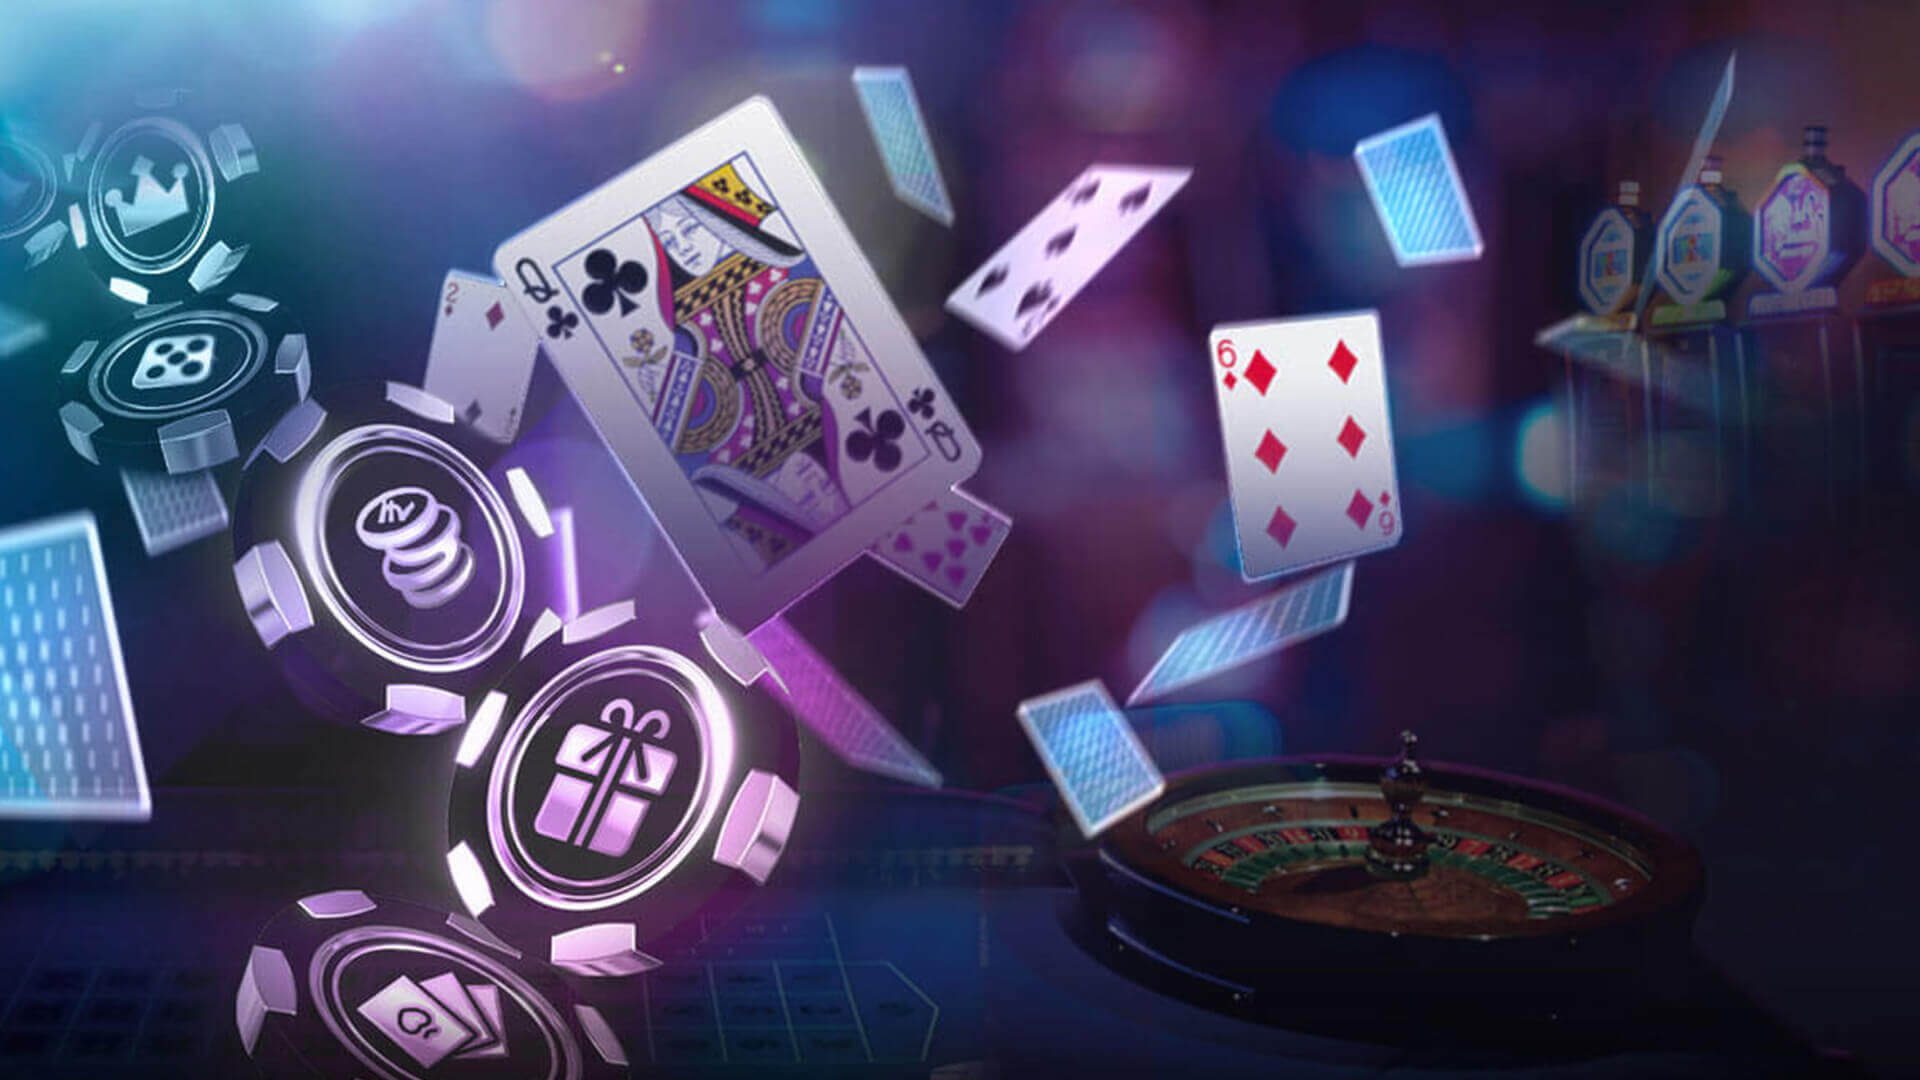 The technology behind online casino games